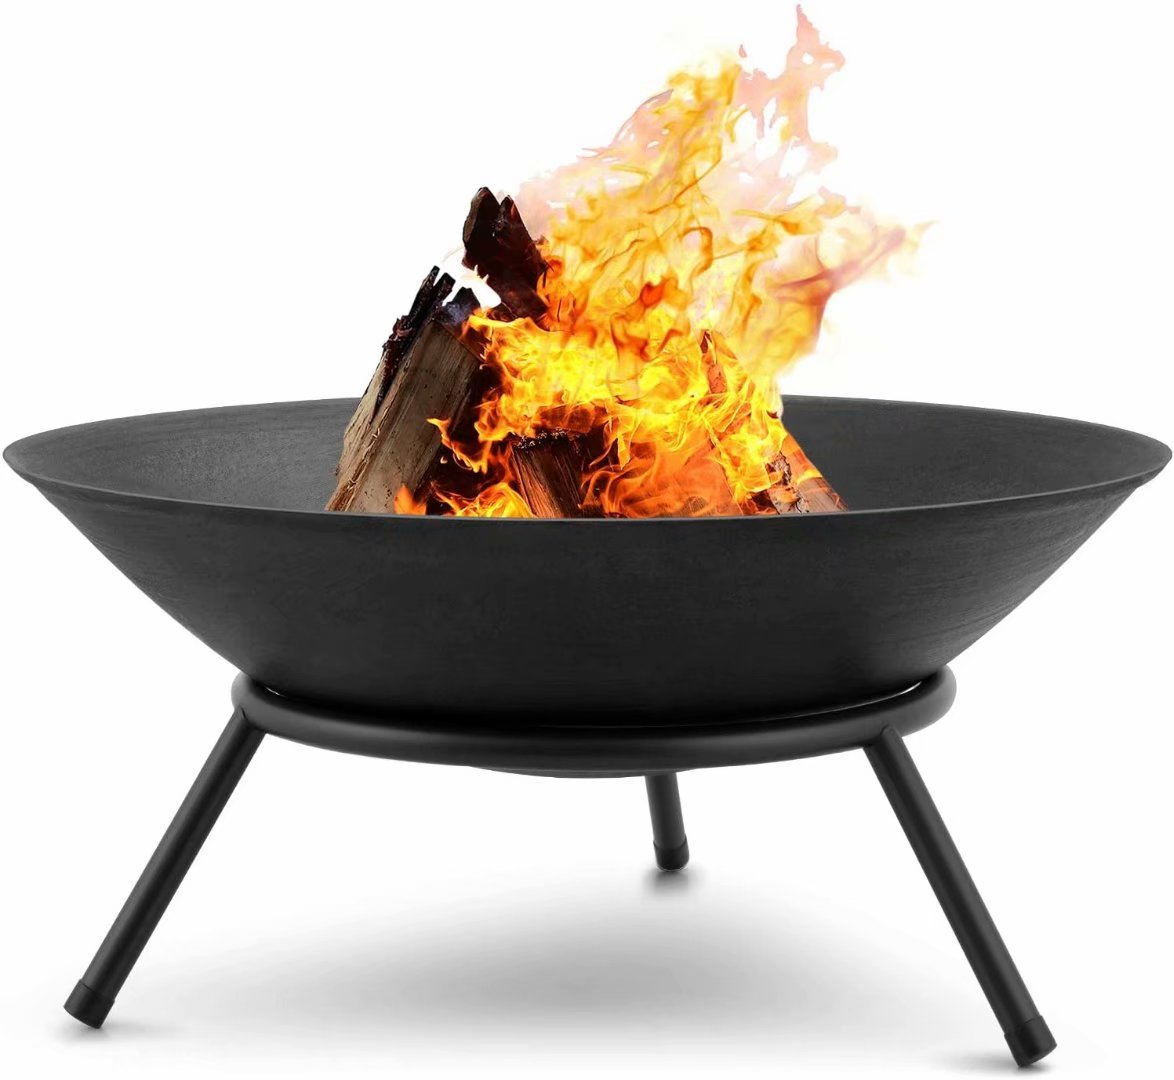 Fire Pit Outdoor Wood Burning 22.6in Cast Iron Firebowl Fireplace Heater Log Charcoal Burner Extra Deep Large Round Camping Outside Patio Backyard Deck Heavy Duty Metal Grate Black - image 1 of 8